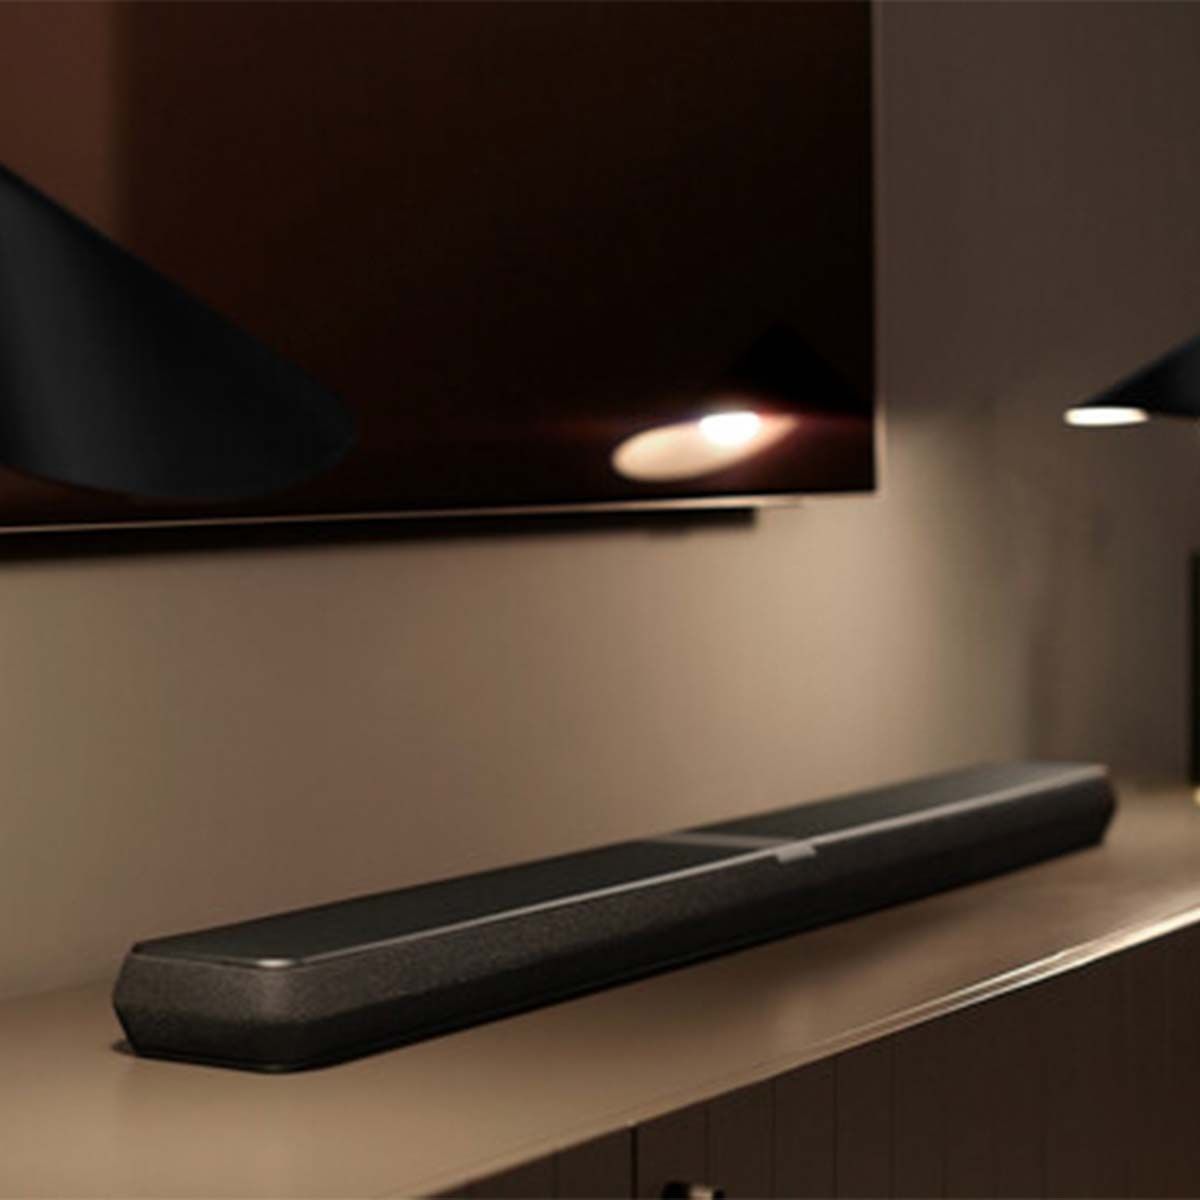 Bowers & Wilkins Panorama 3 Soundbar, angled view of resting on a media console